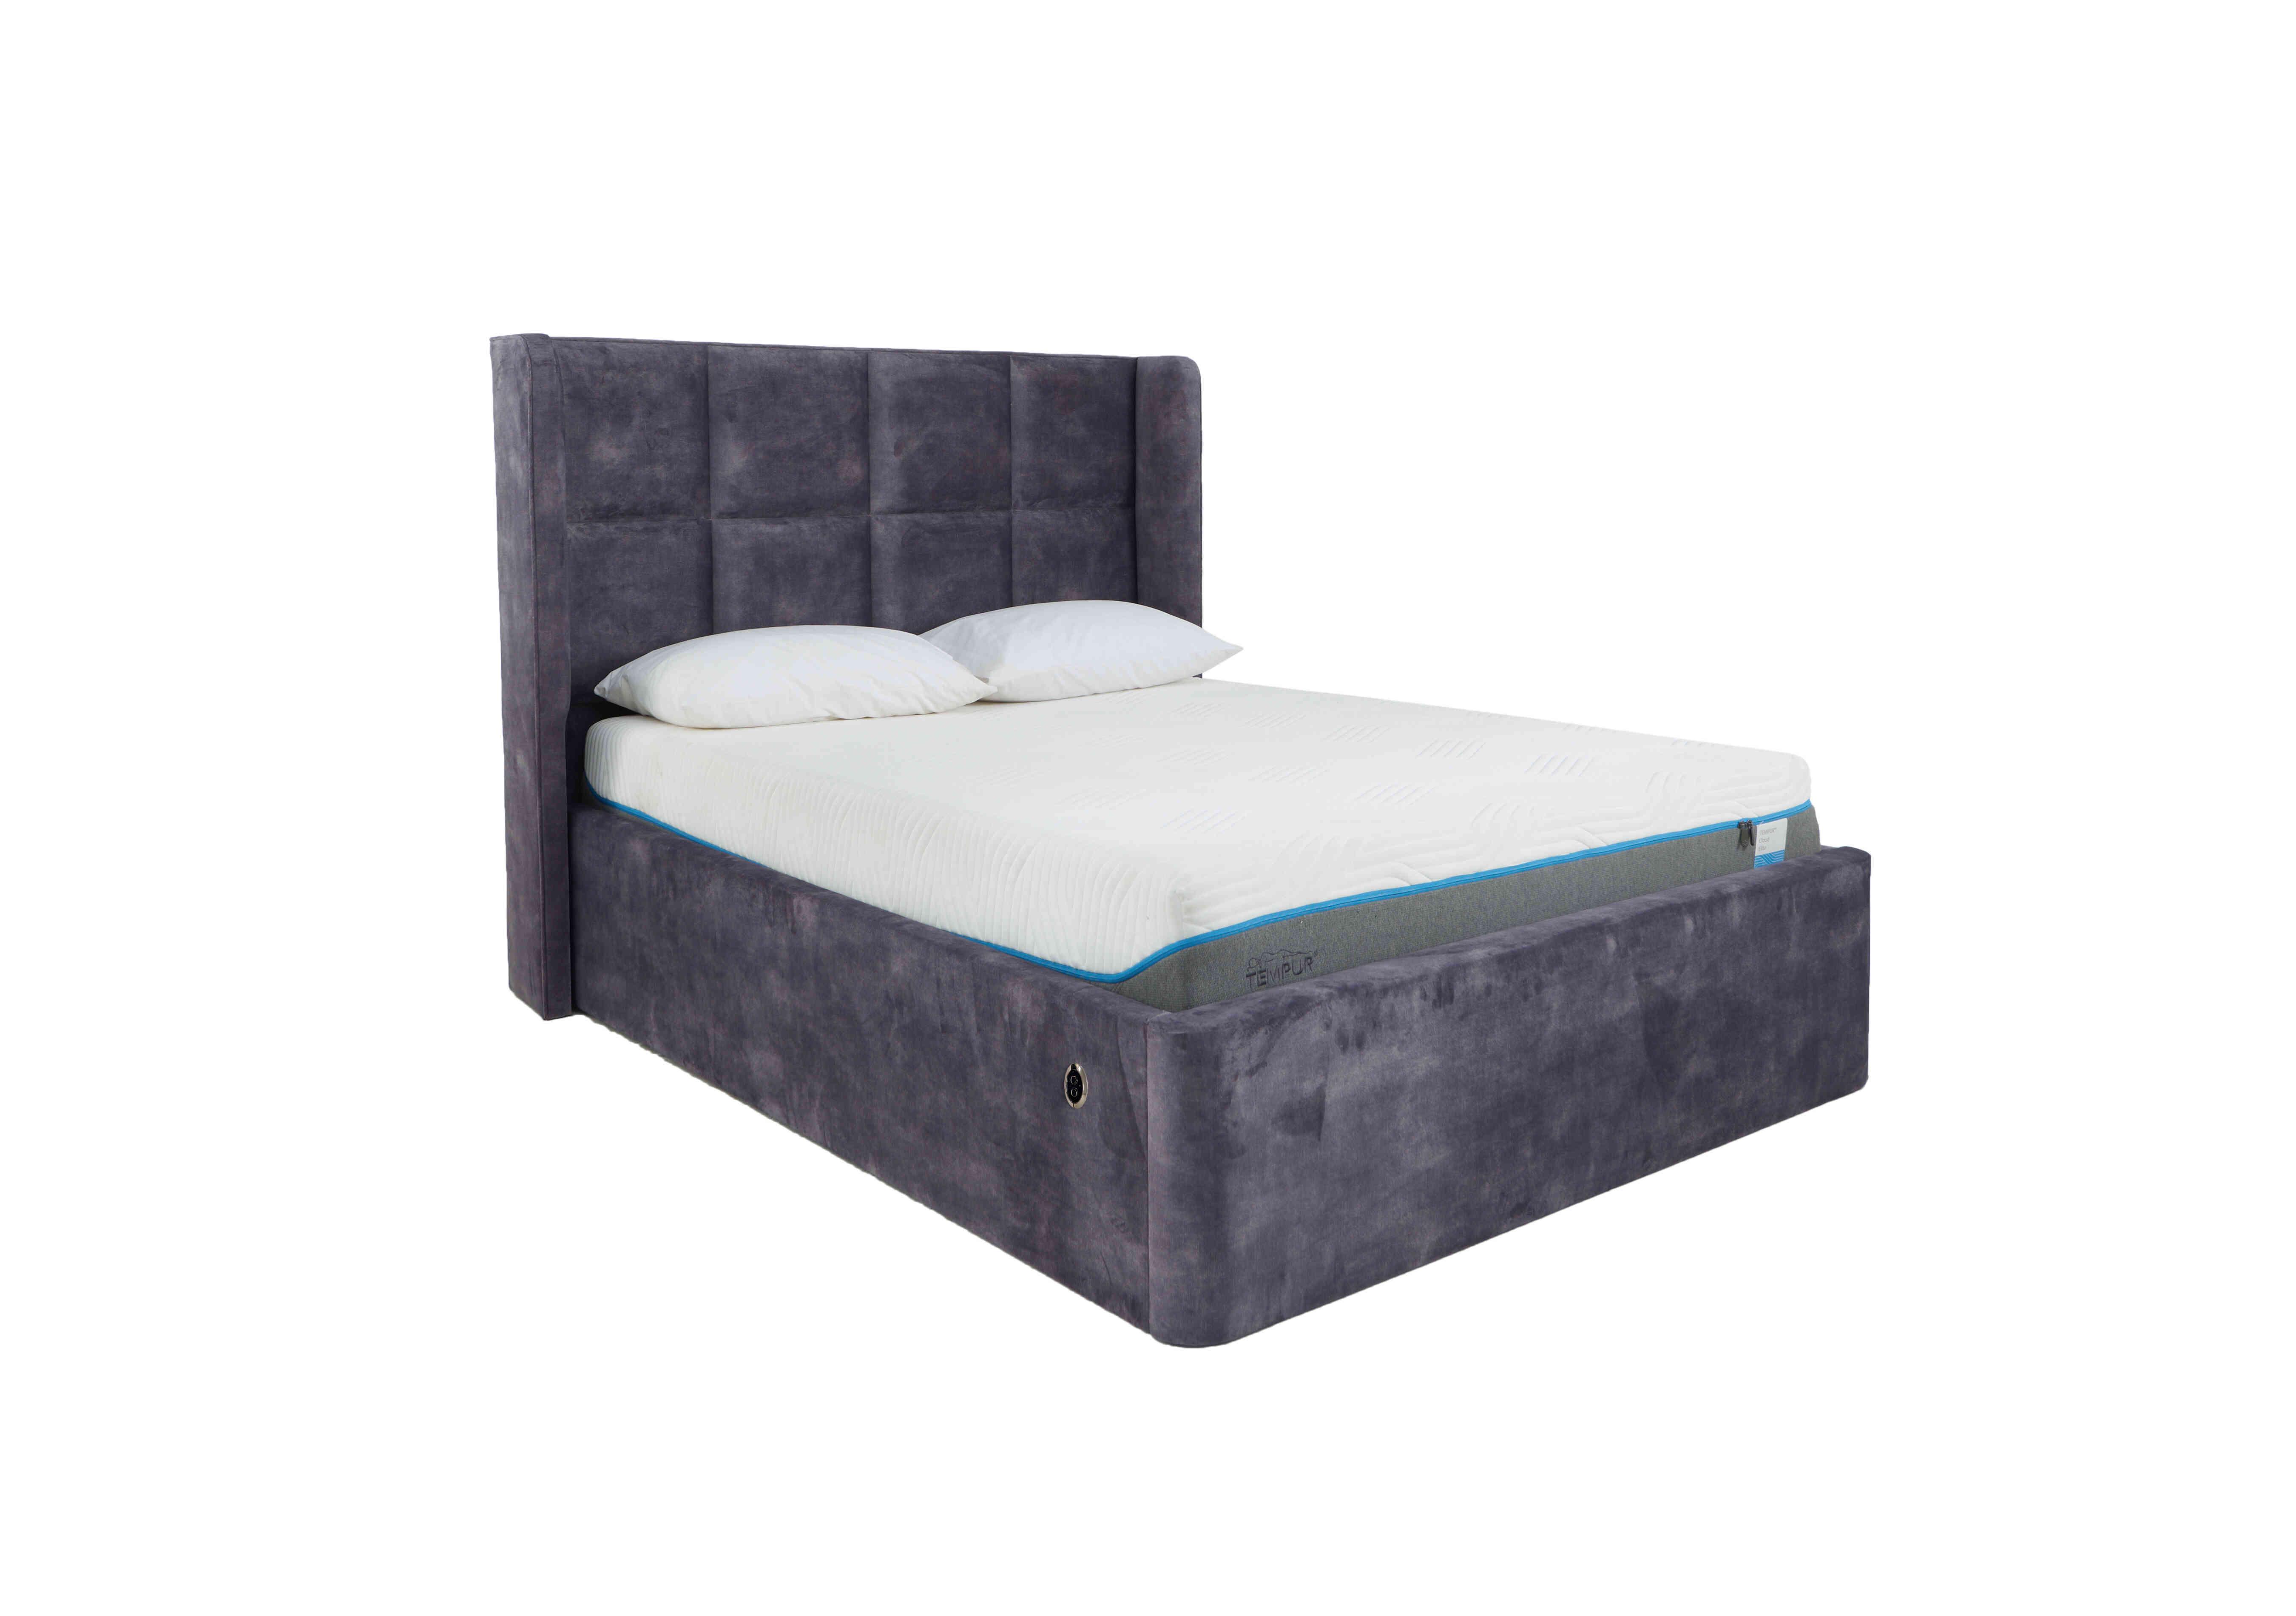 Shiva Electric Ottoman Bed Frame in Savannah Armour on Furniture Village